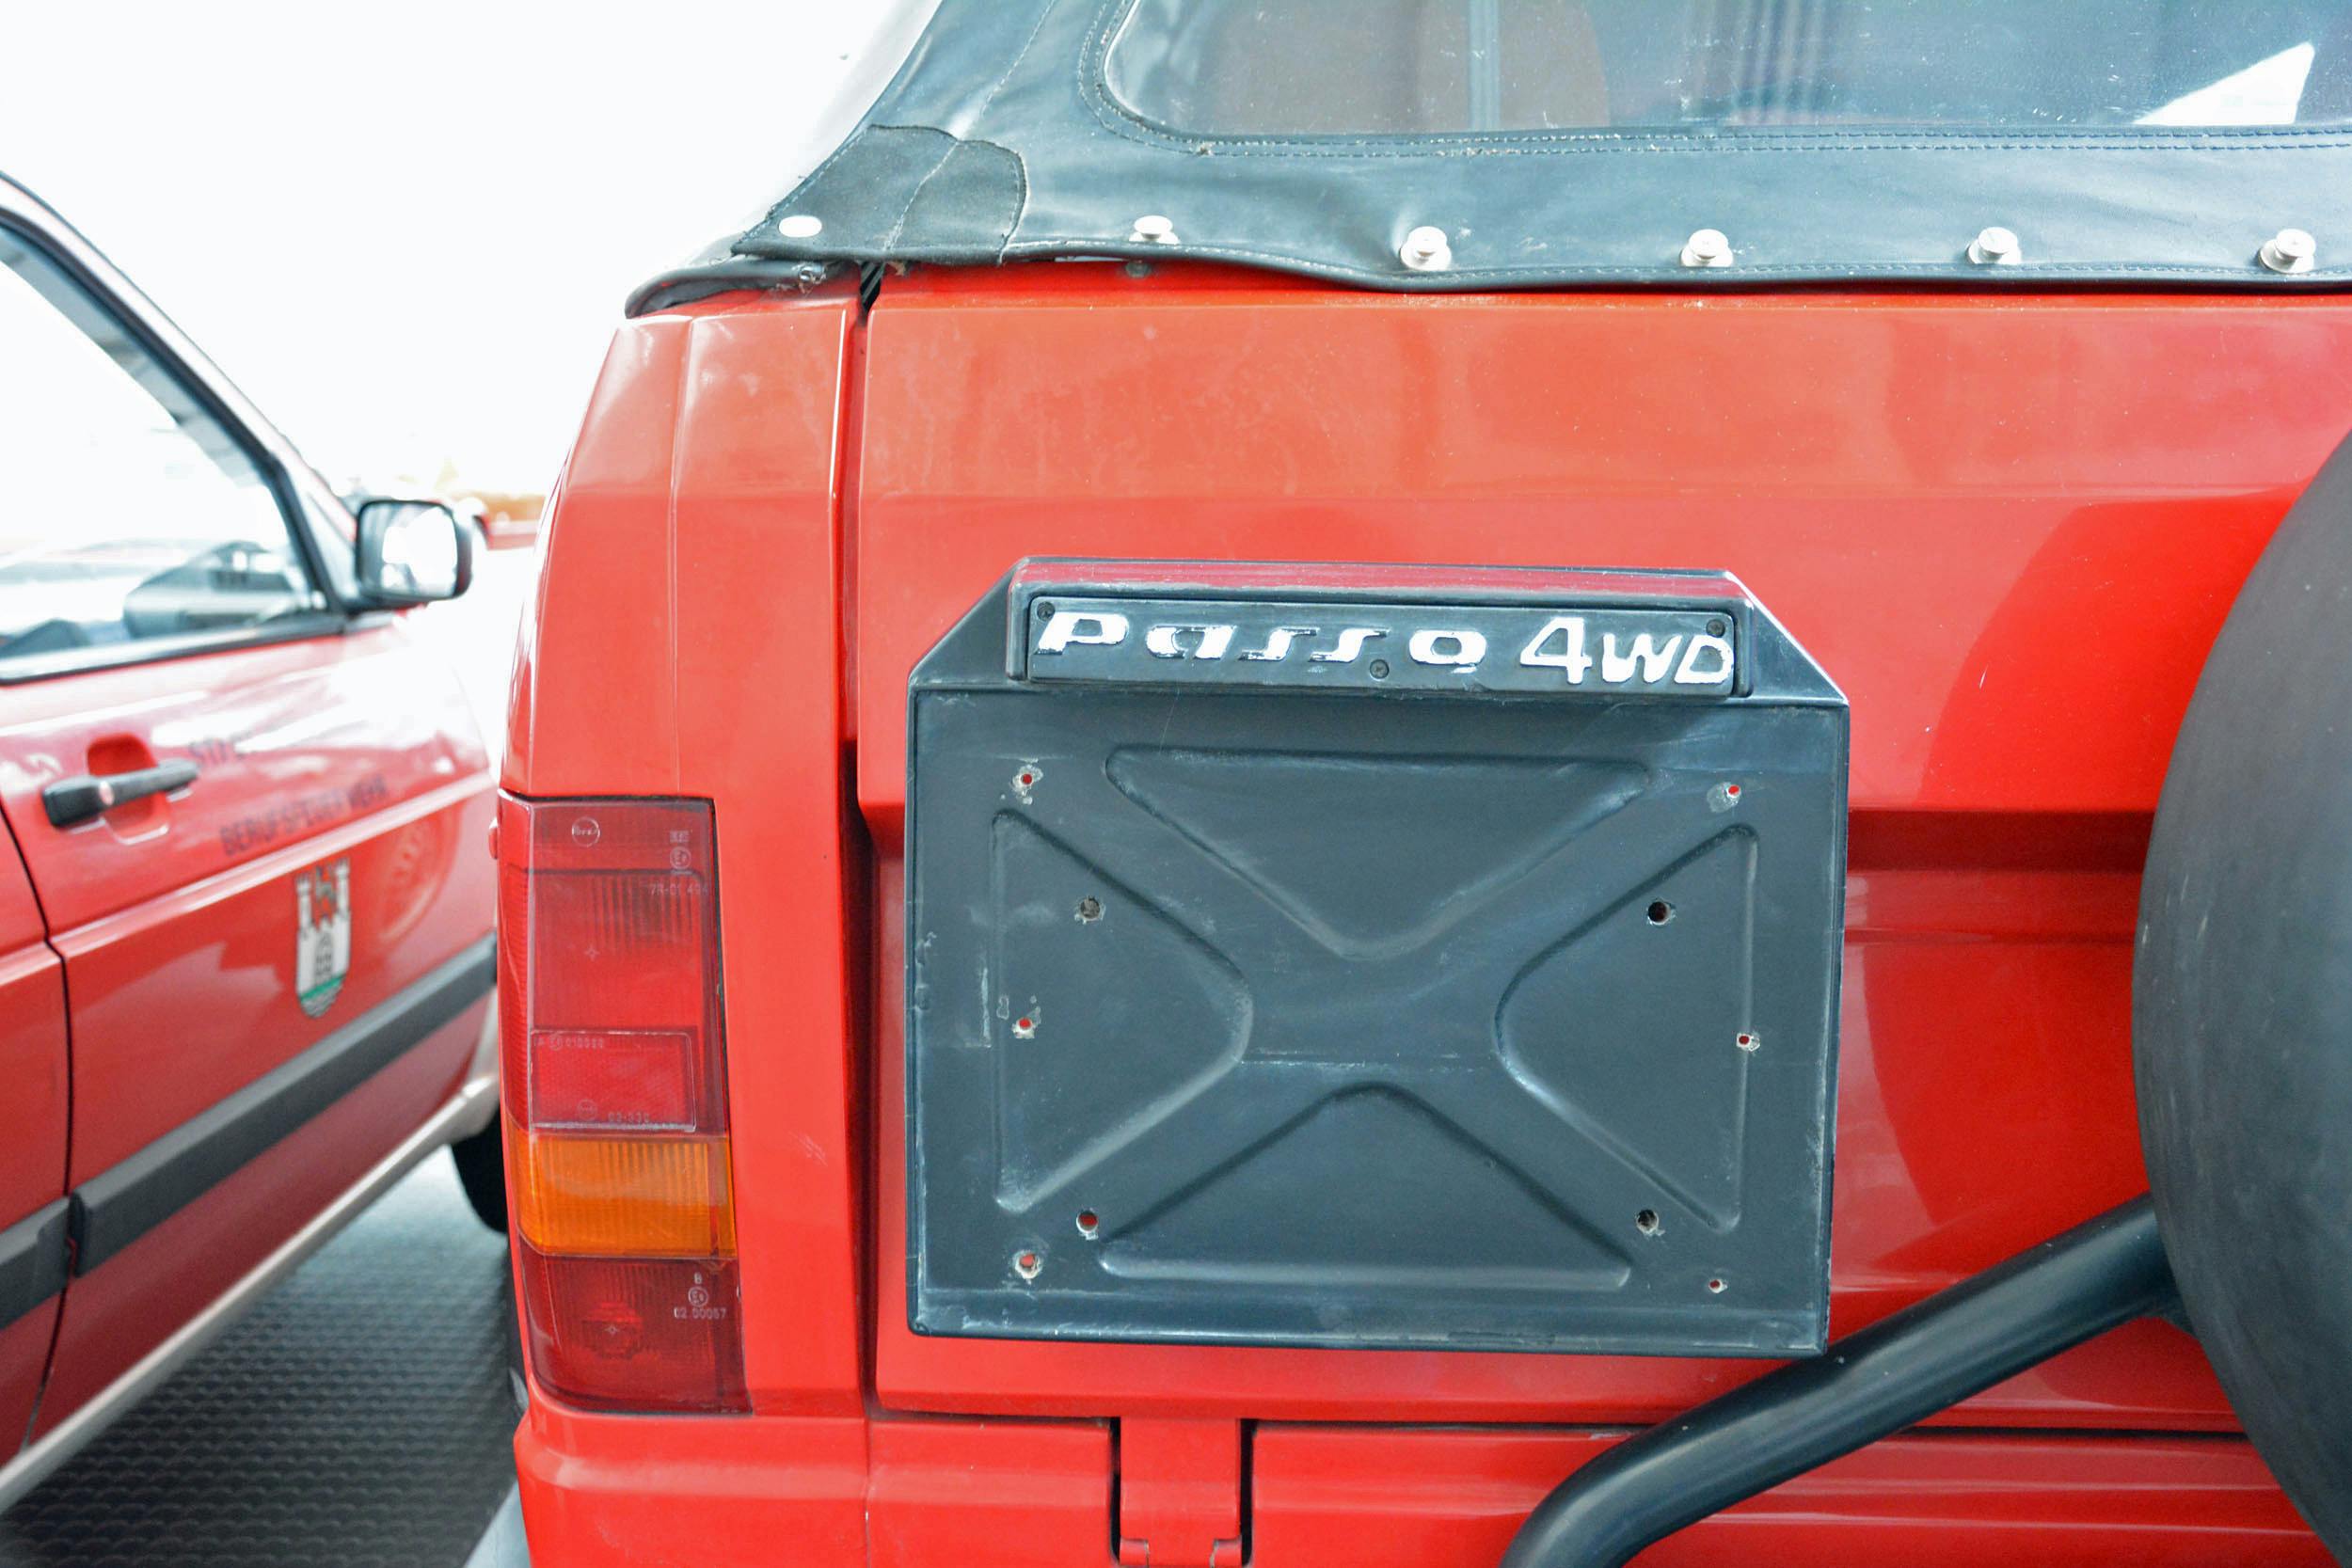 Biagini Passo VW-based 4x4 license plate holder